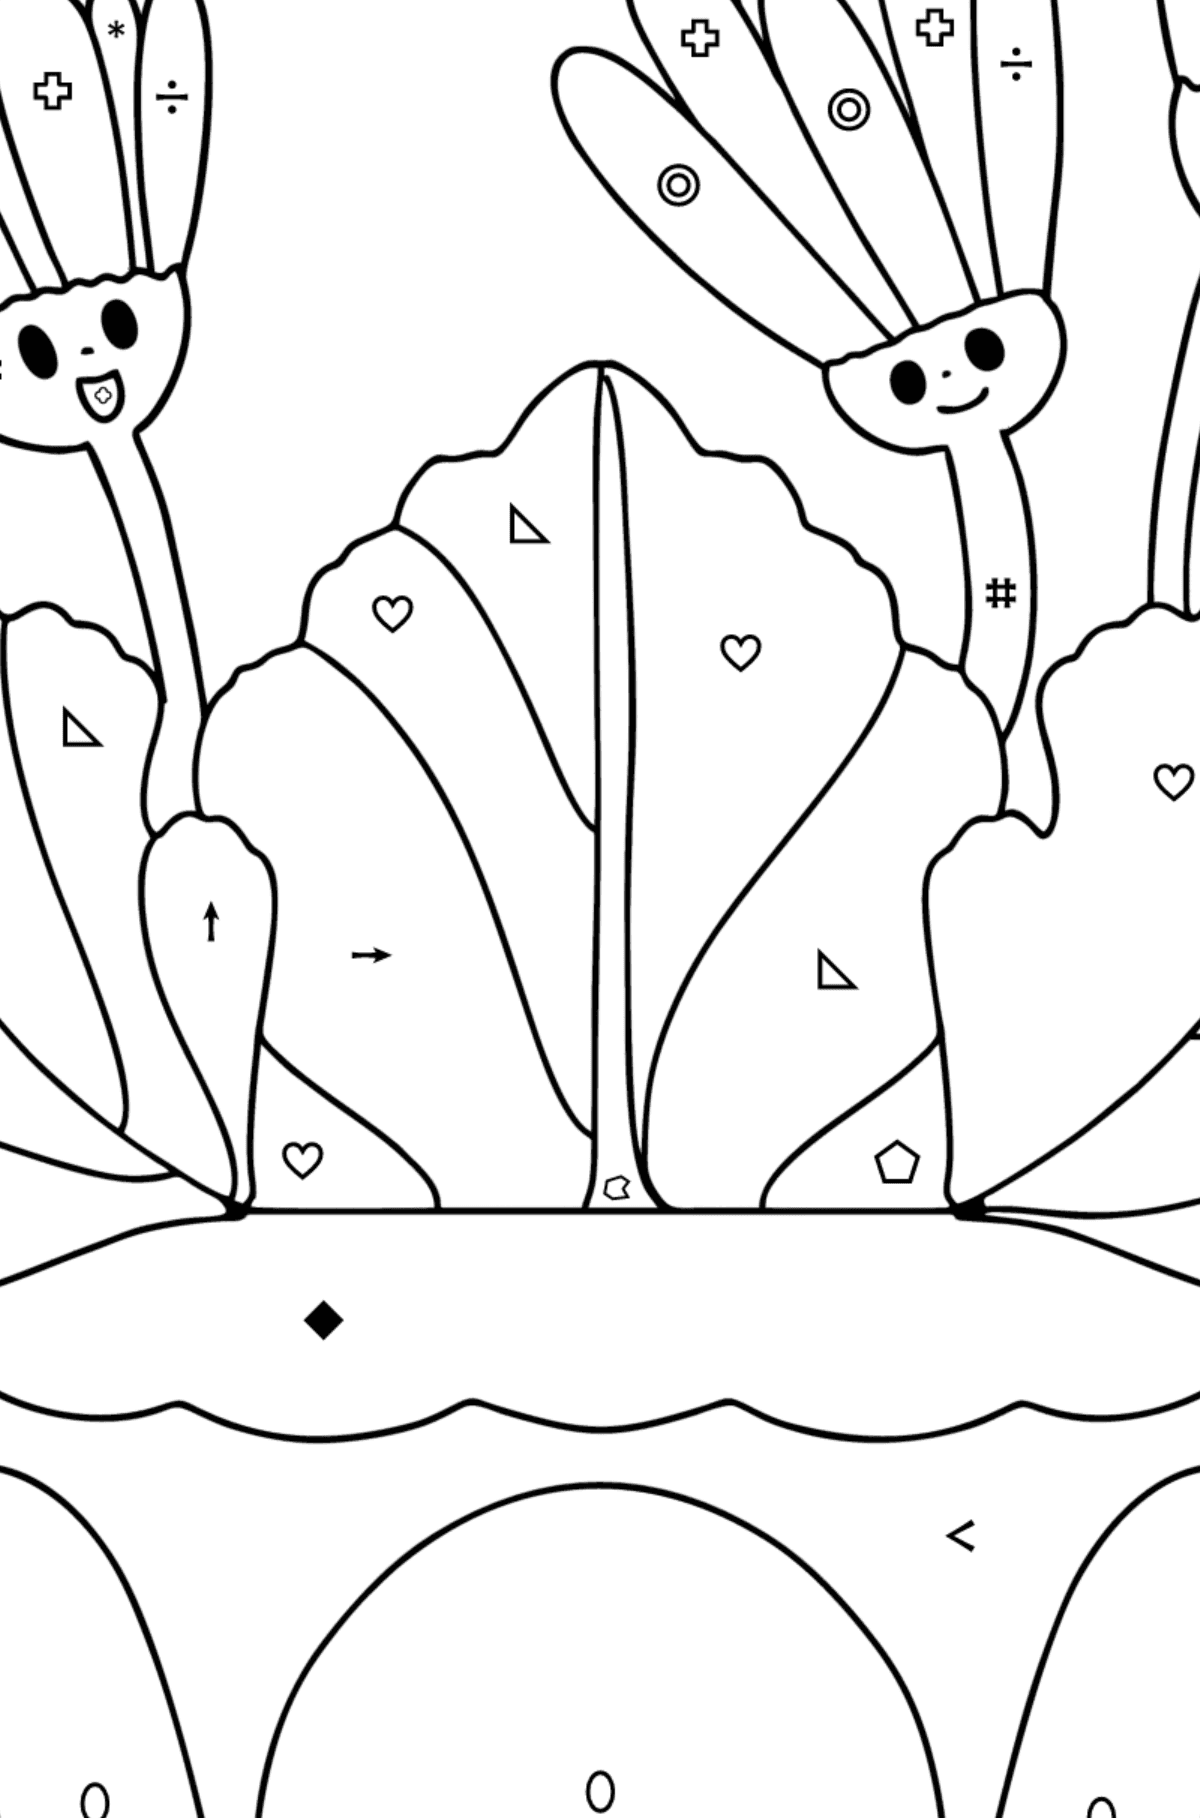 Primrose with eyes coloring page - Coloring by Symbols and Geometric Shapes for Kids